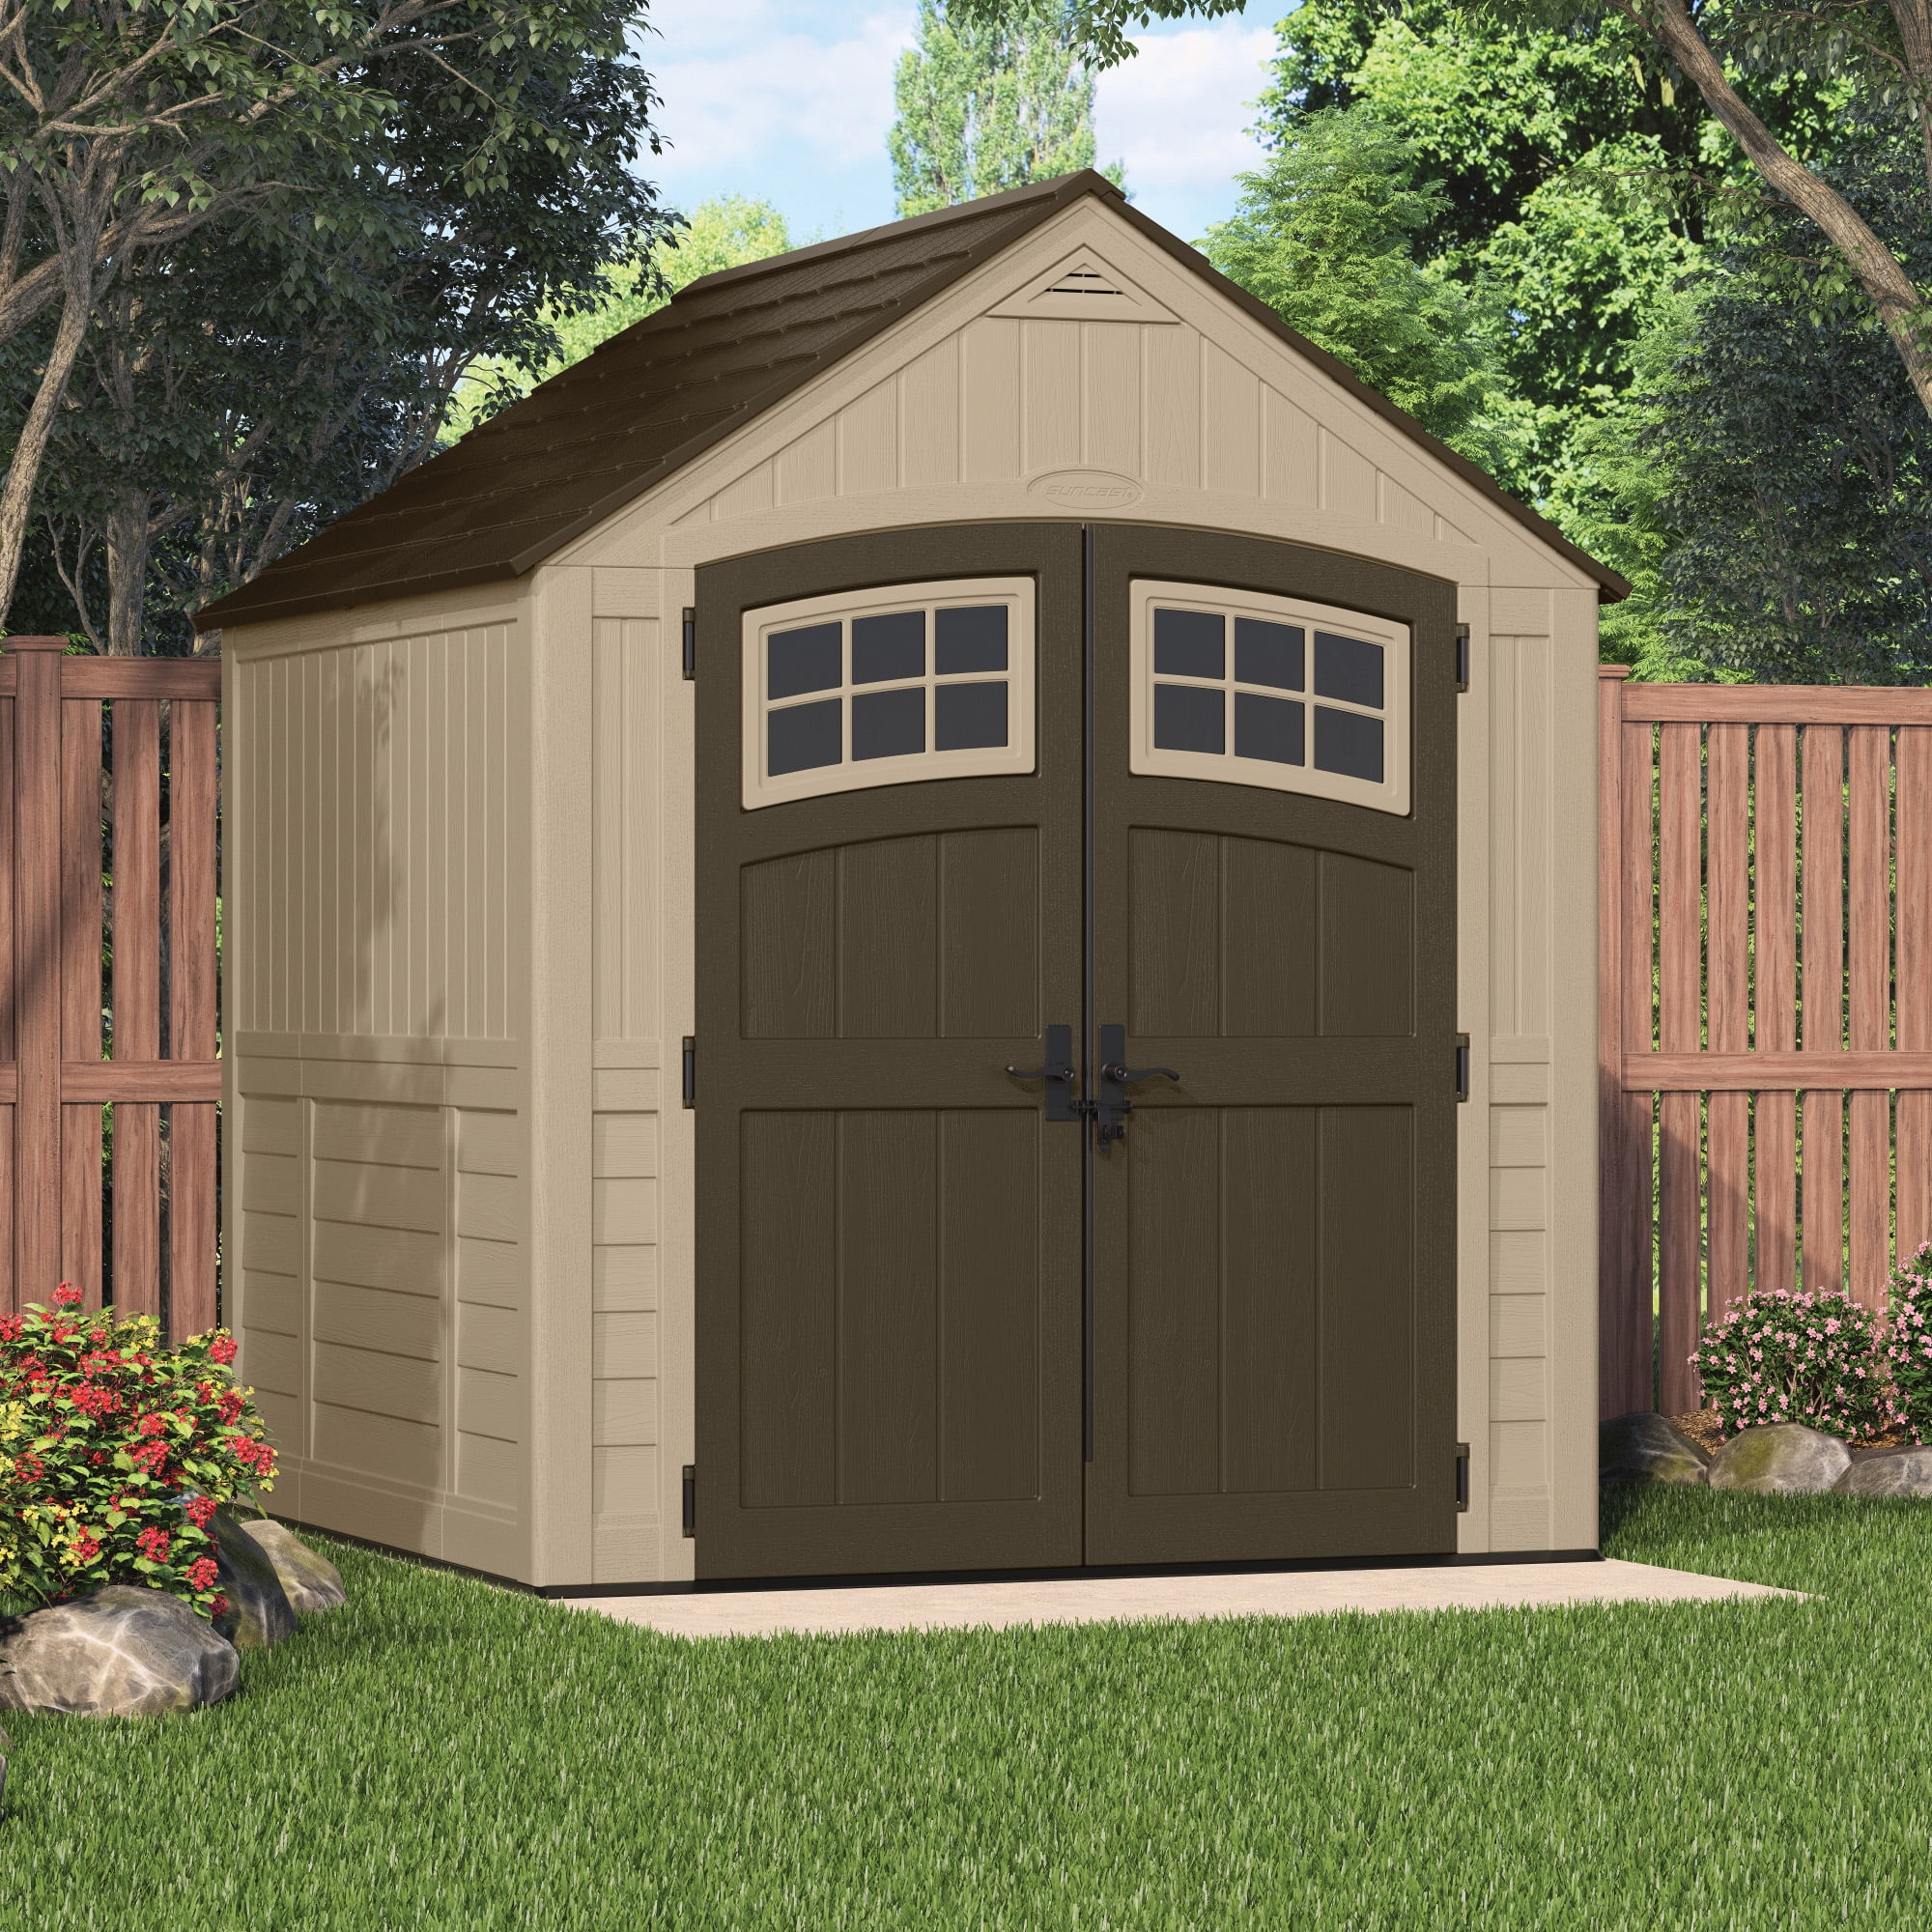 Suncast lean to shed